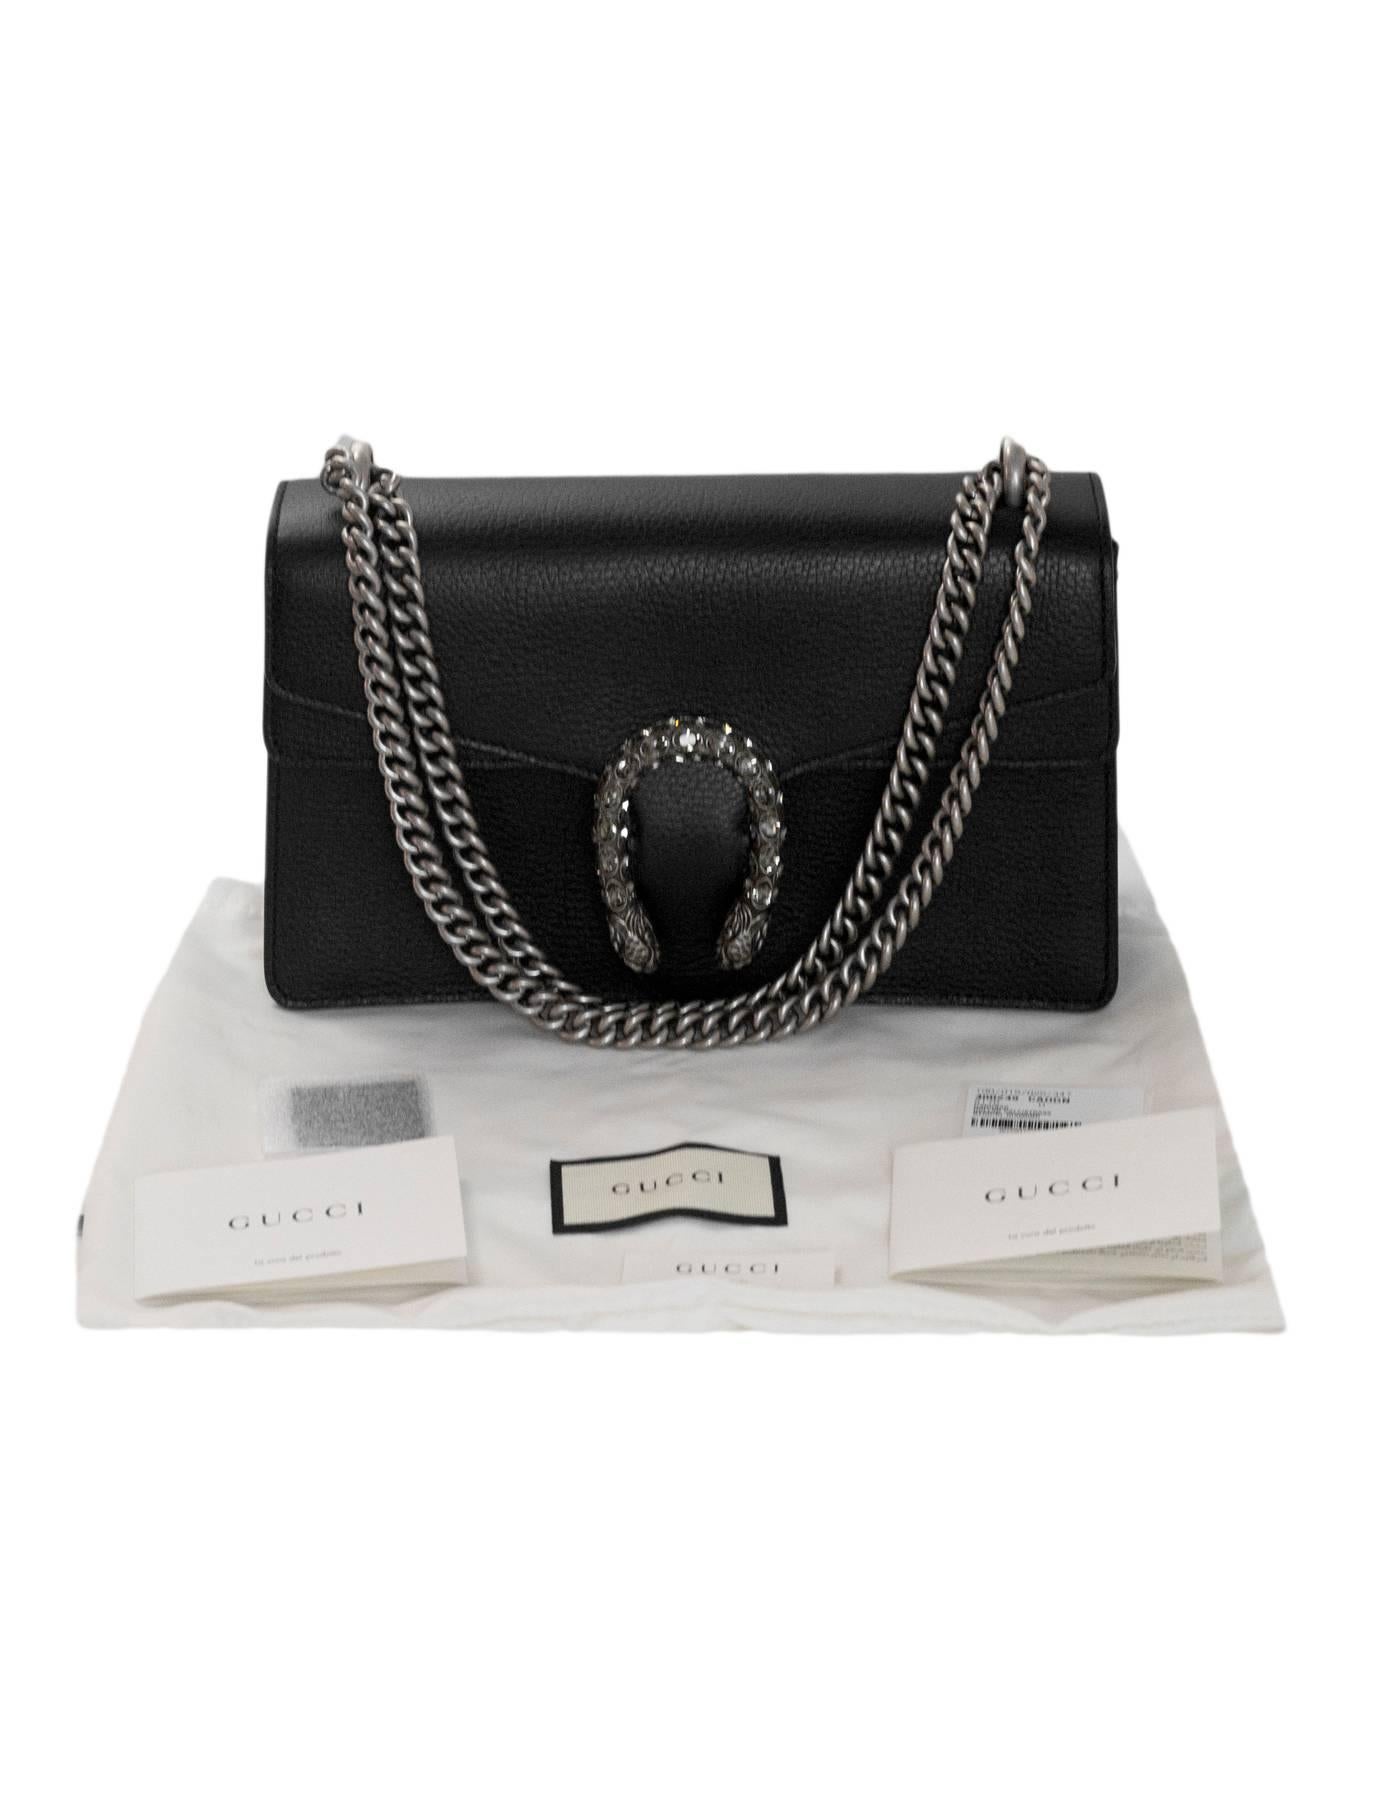 Gucci Black Leather Small Crystal Dionysus Flap Bag 7